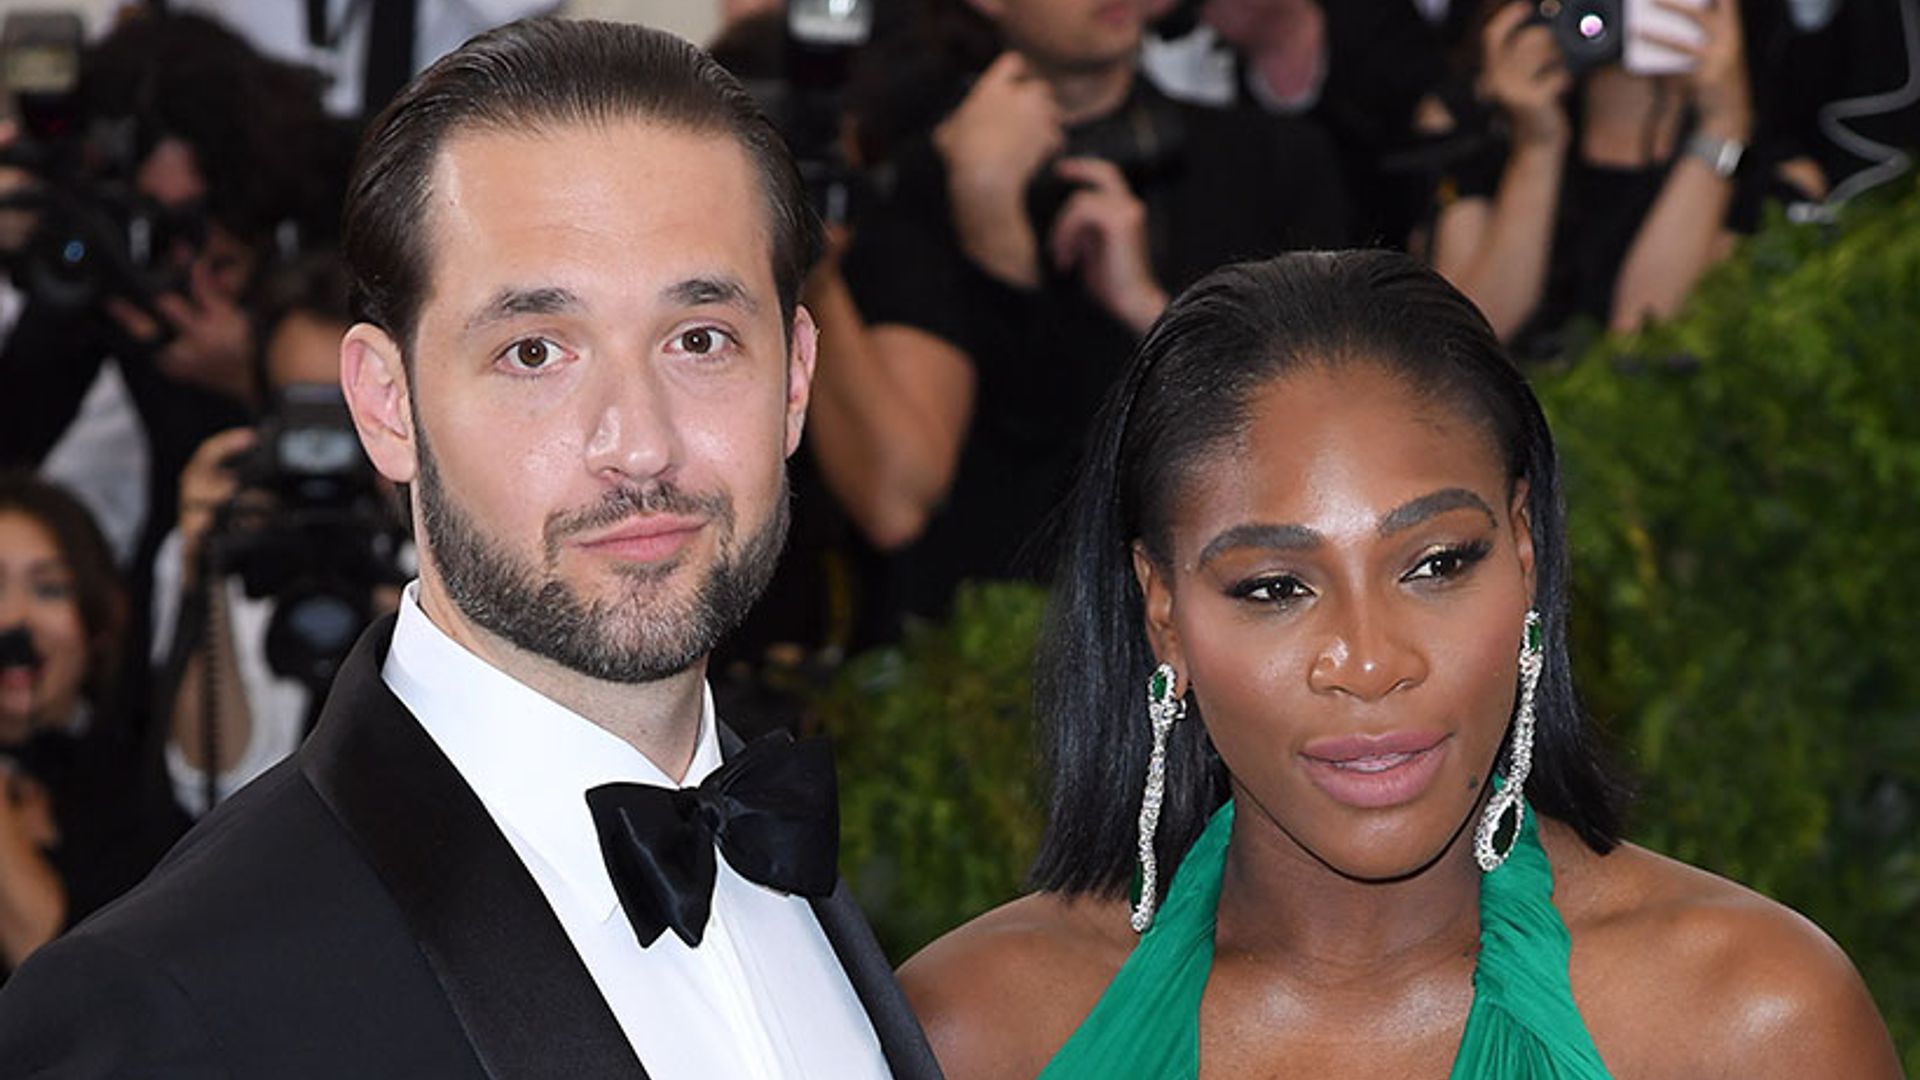 Image result for serena williams and alexis ohanian